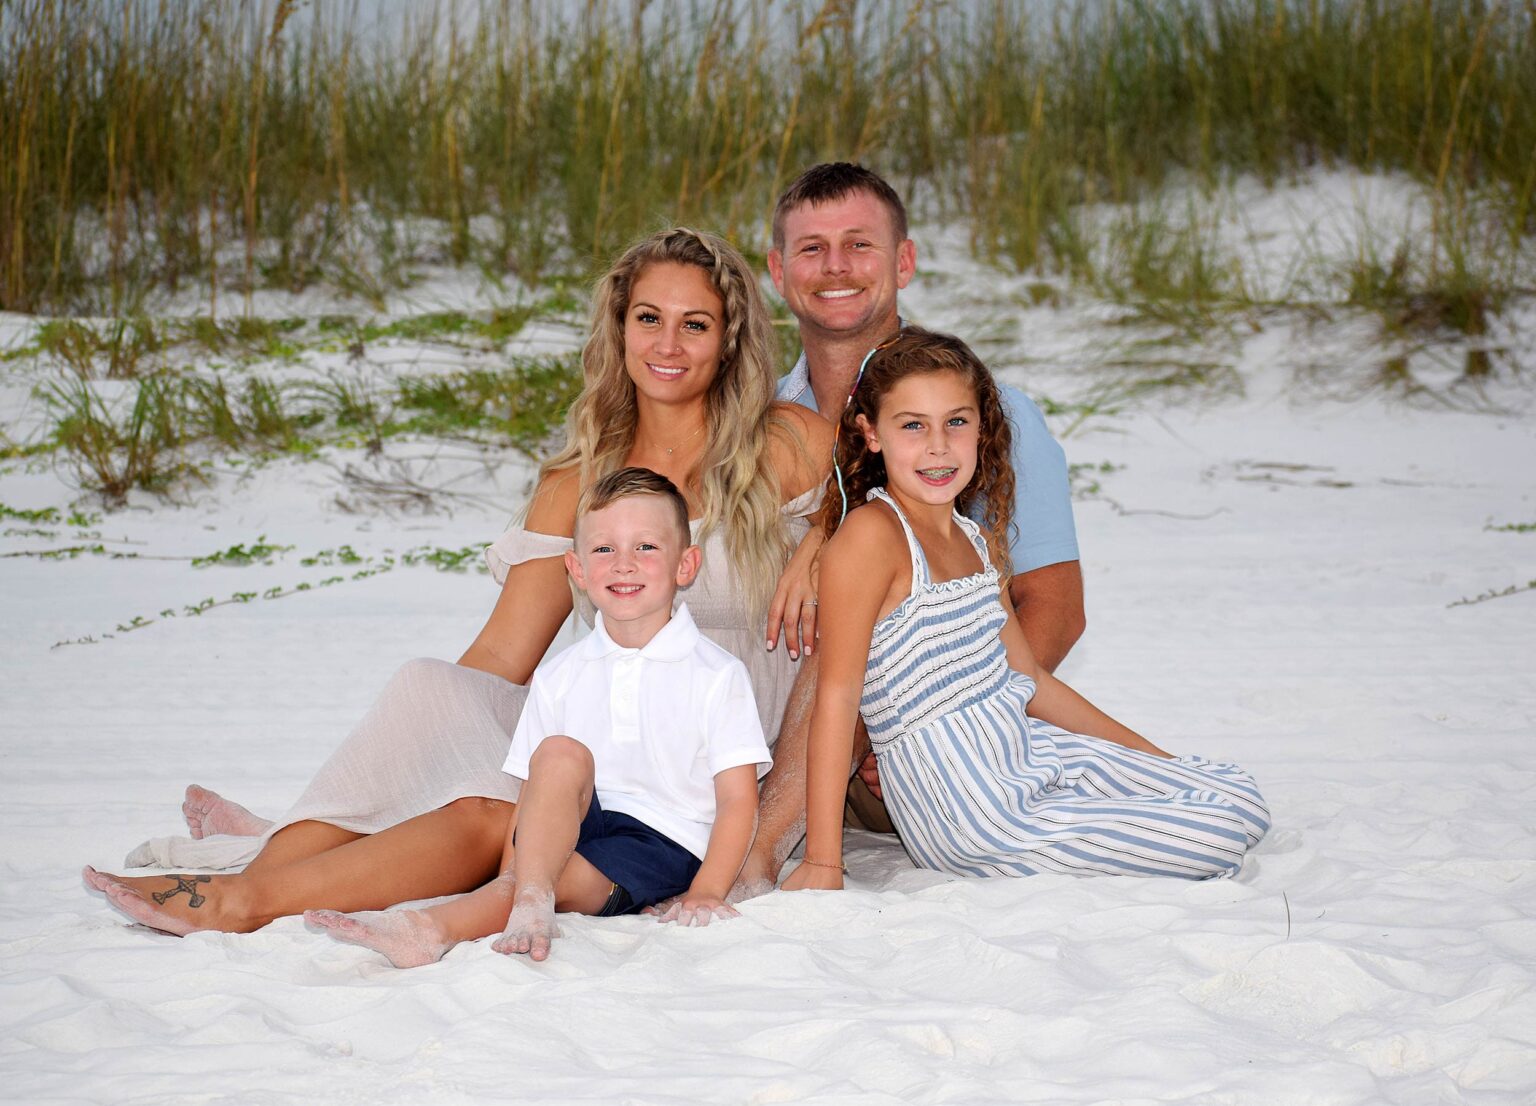 Cape Cod Family Portraits at Skaket Beach with Teenagers — Saratoga Springs  Baby Photographer, Nicole Starr Photography